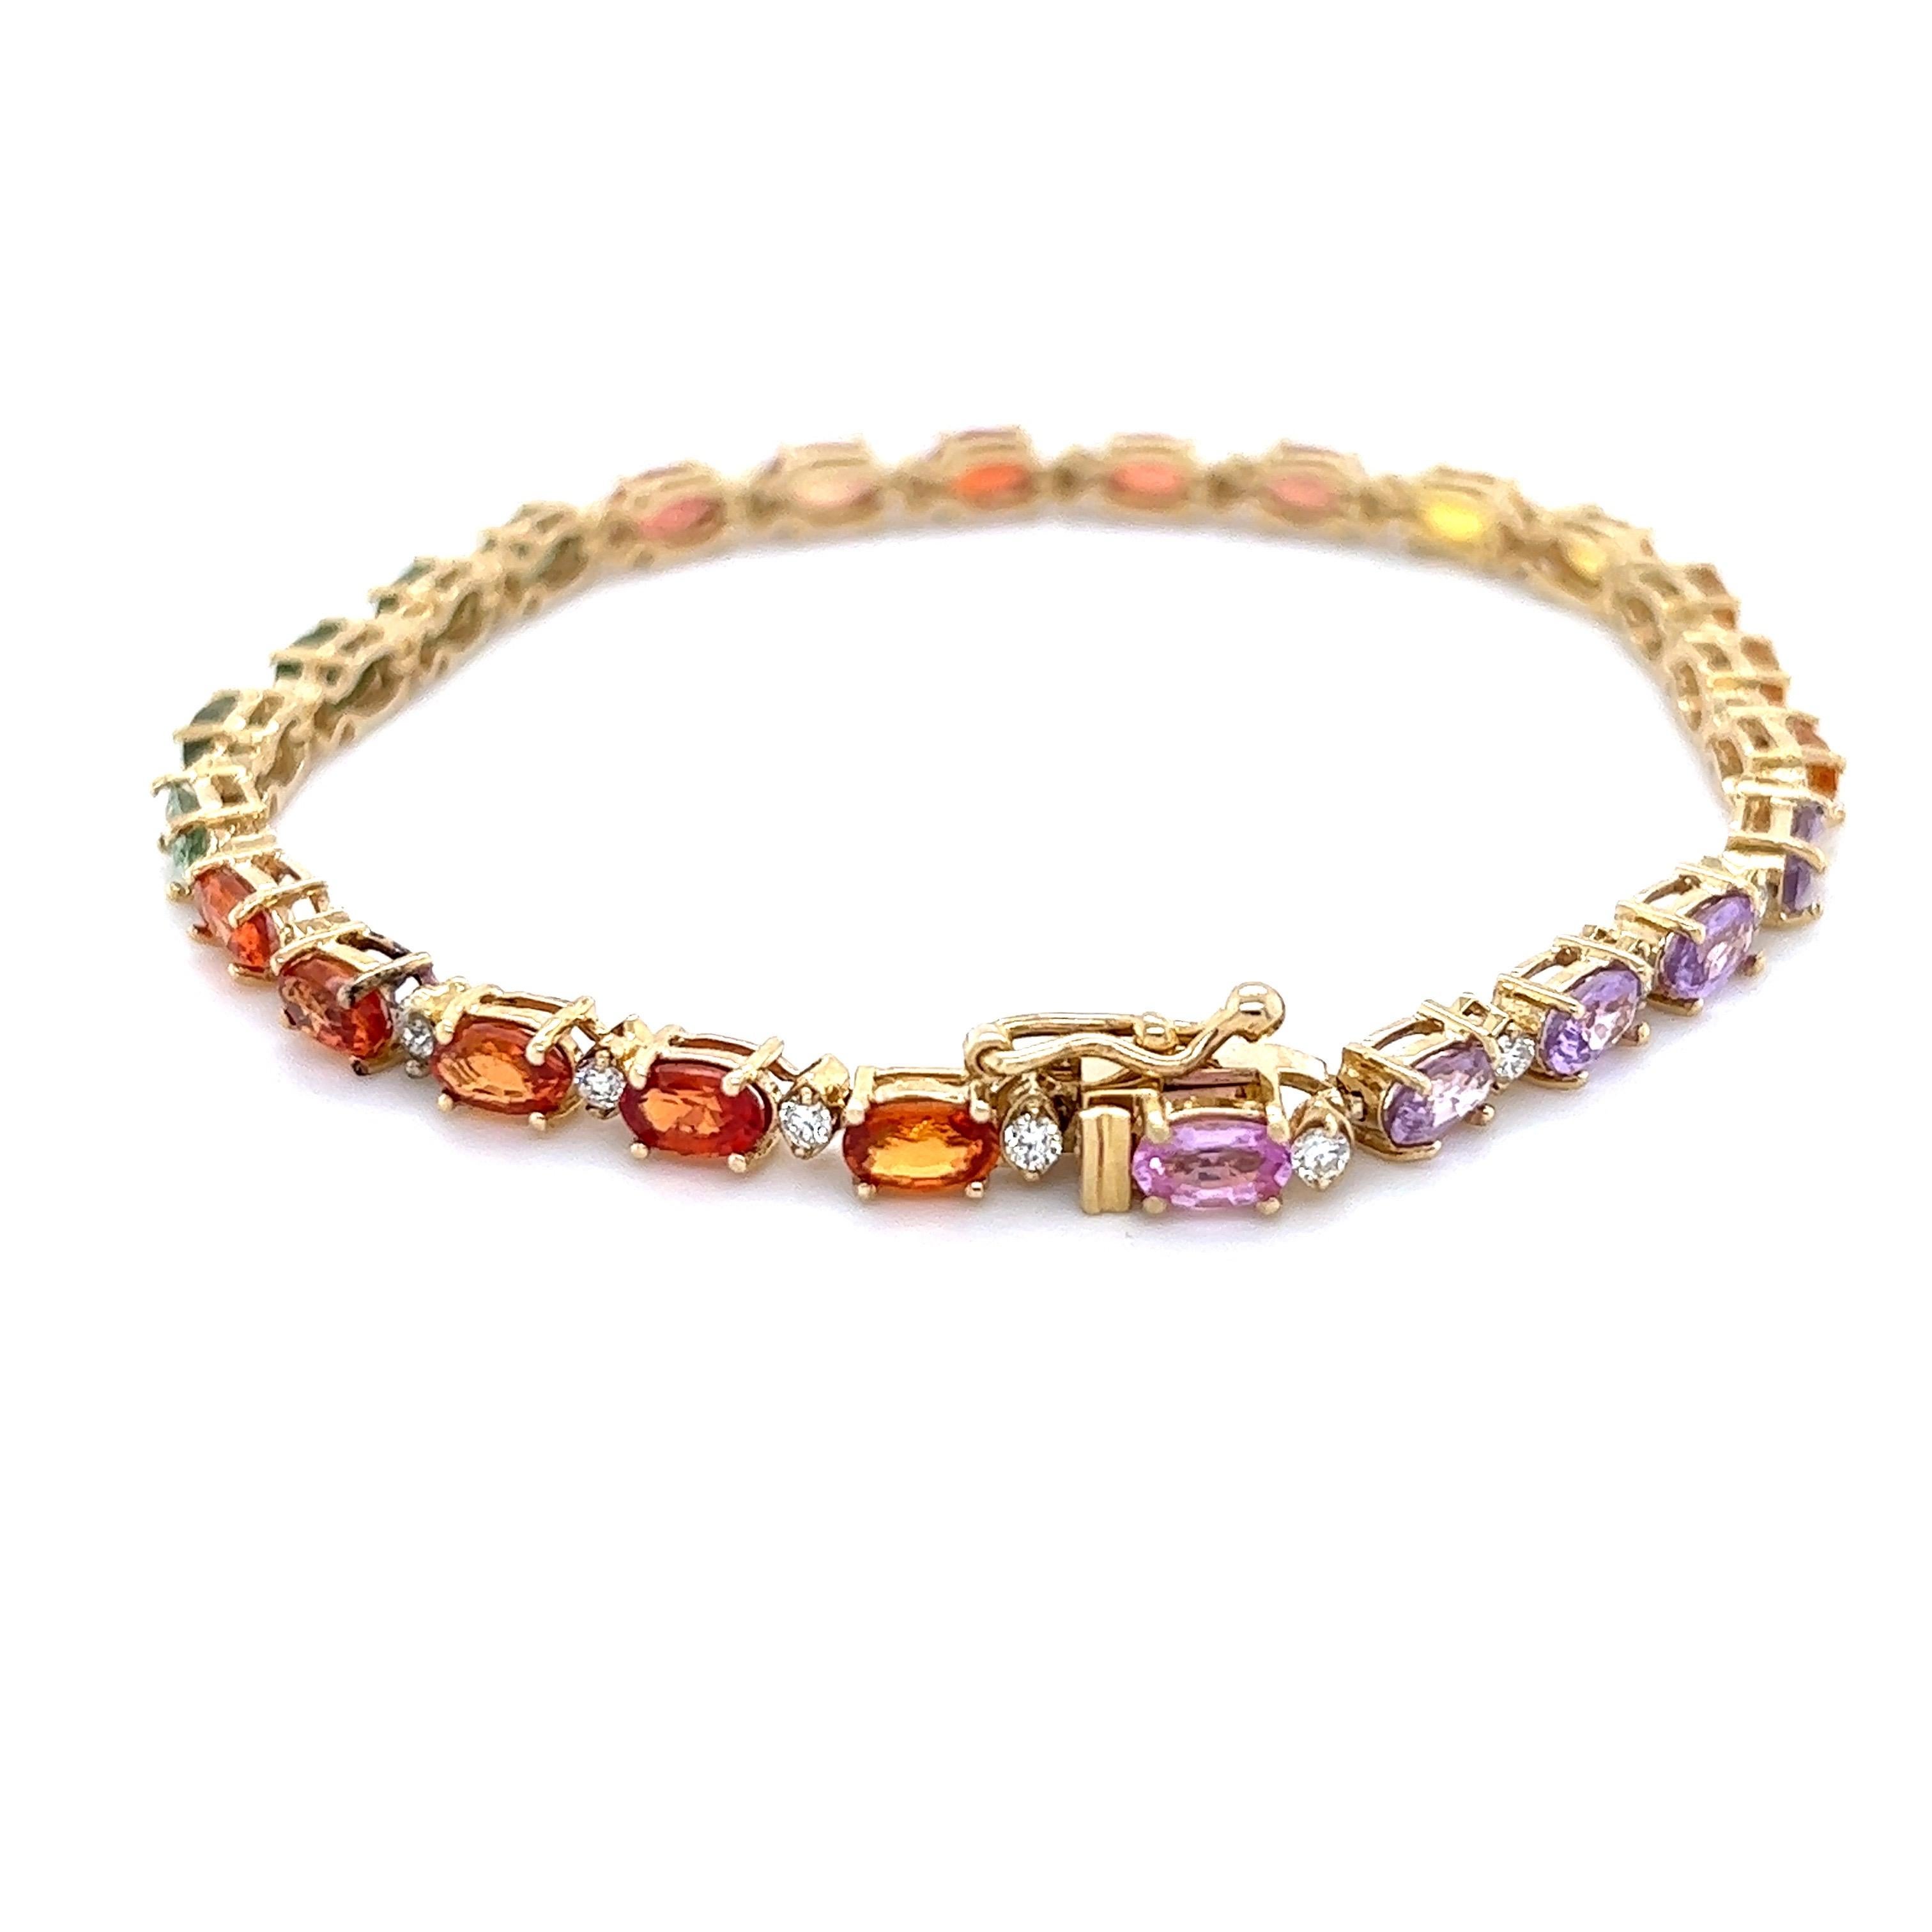 This Bracelet has Natural Oval Cut Multi Sapphires that weigh 9.03 Carats. It also has Natural Round Cut Diamonds that weigh 0.64 Carats. The total carat weight of the bracelet is 9.67 Carats. (Clarity: VS, Color: H)

It is made in 14 Karat Yellow